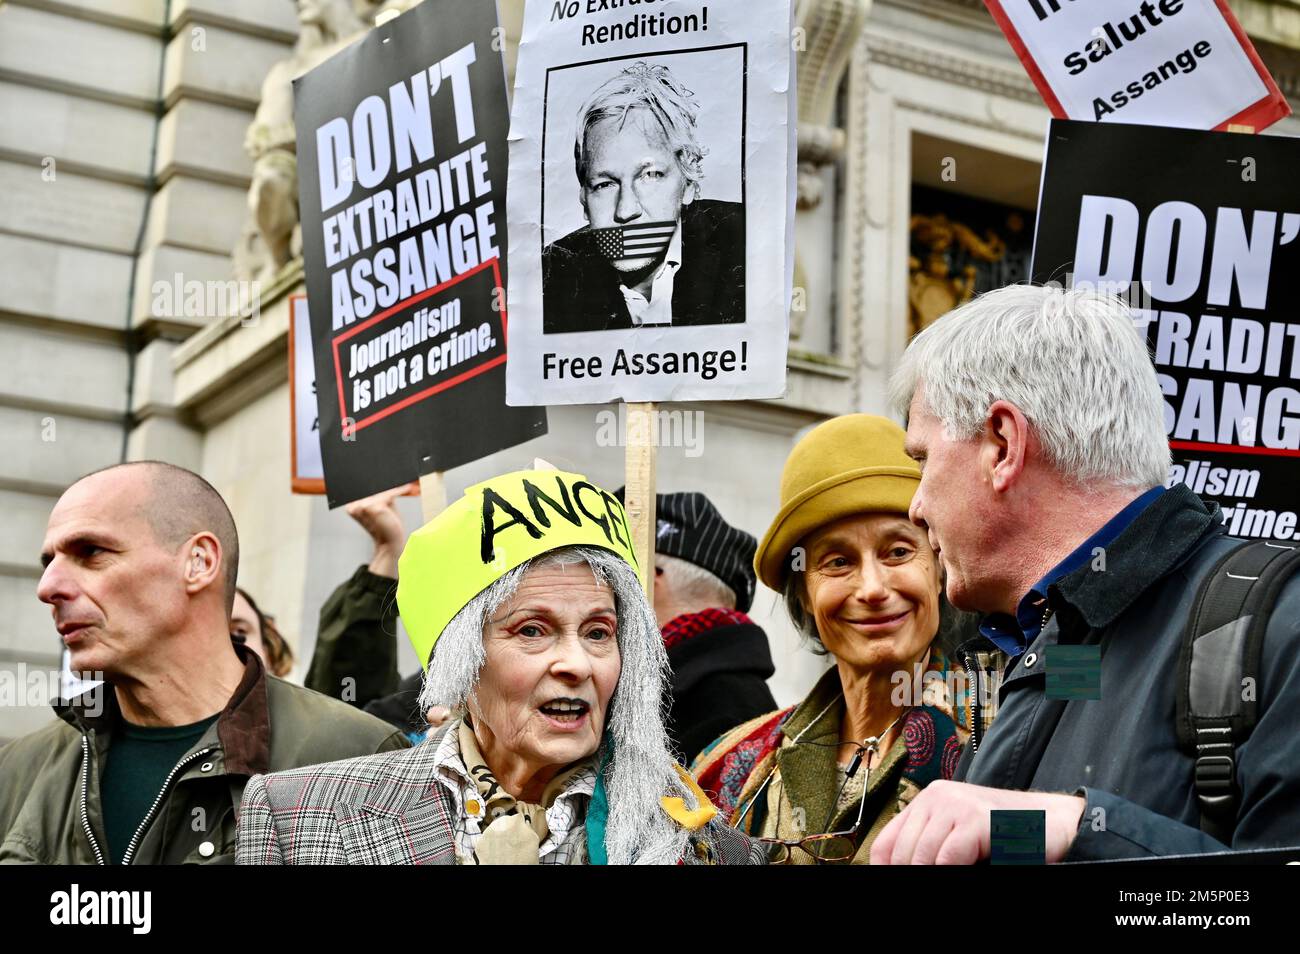 Vivienne Westwood the Queen of British Fashion died aged 81 years. FILE PICTURE. Vivenne Westwood. Julian Assange Protest, Australia High Comission, The Strand, London. UK Stock Photo